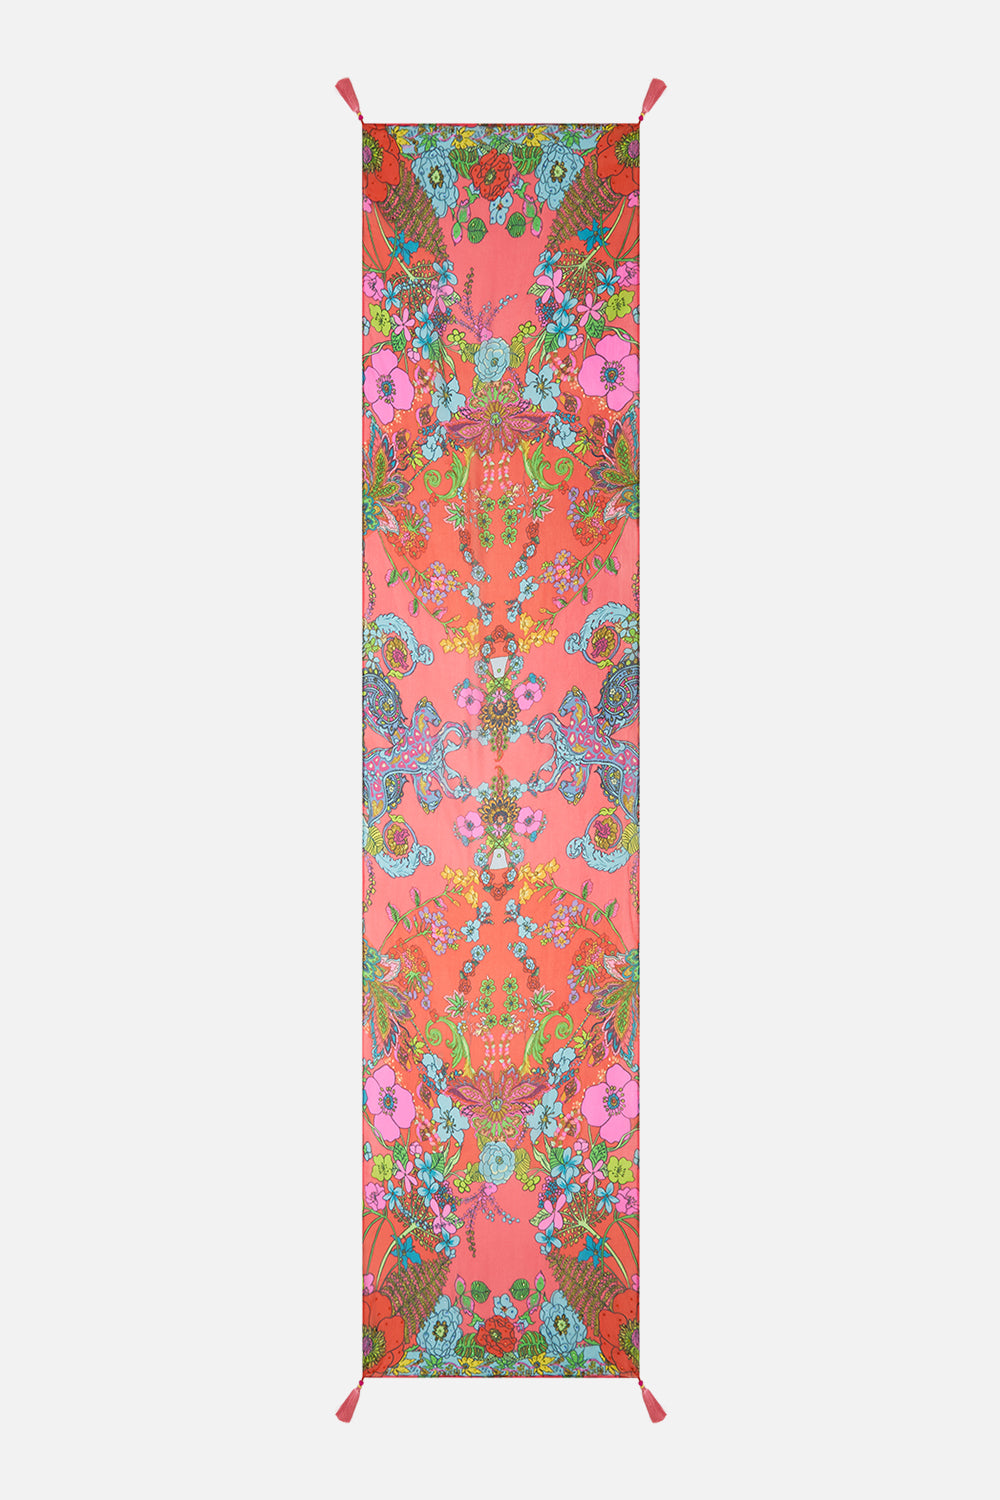 CAMILLA Pink Long Scarf in Windmills and Wildflowers print